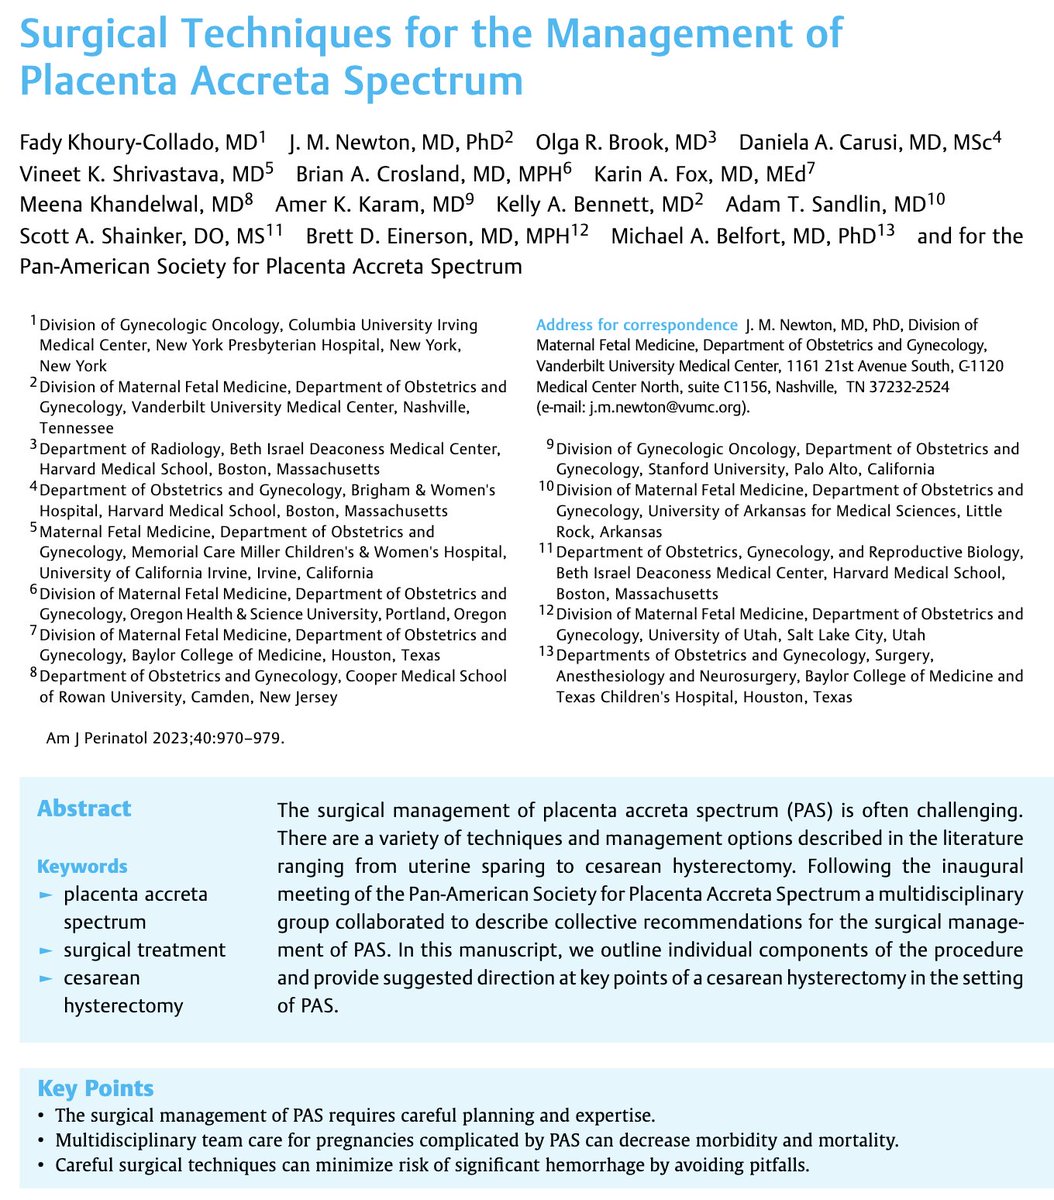 Surgical Techniques for the Management of Placenta Accreta Spectrum ow.ly/P4fx50OXW2O